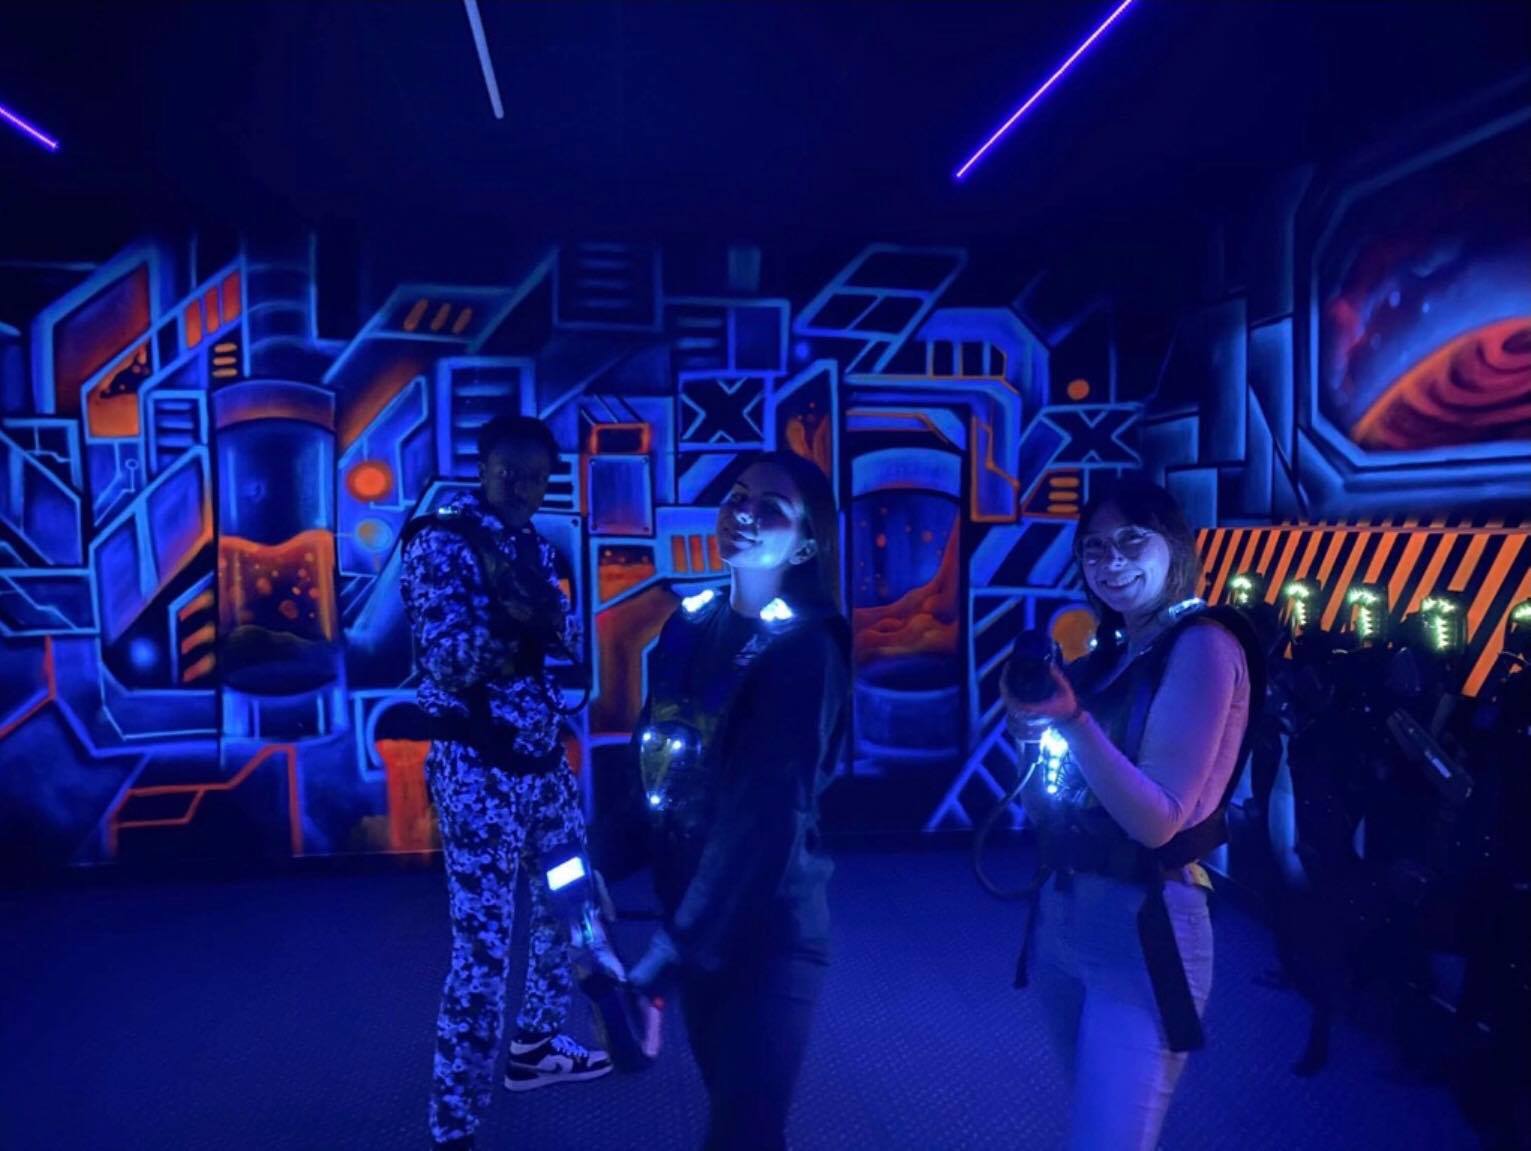 Laser tag players